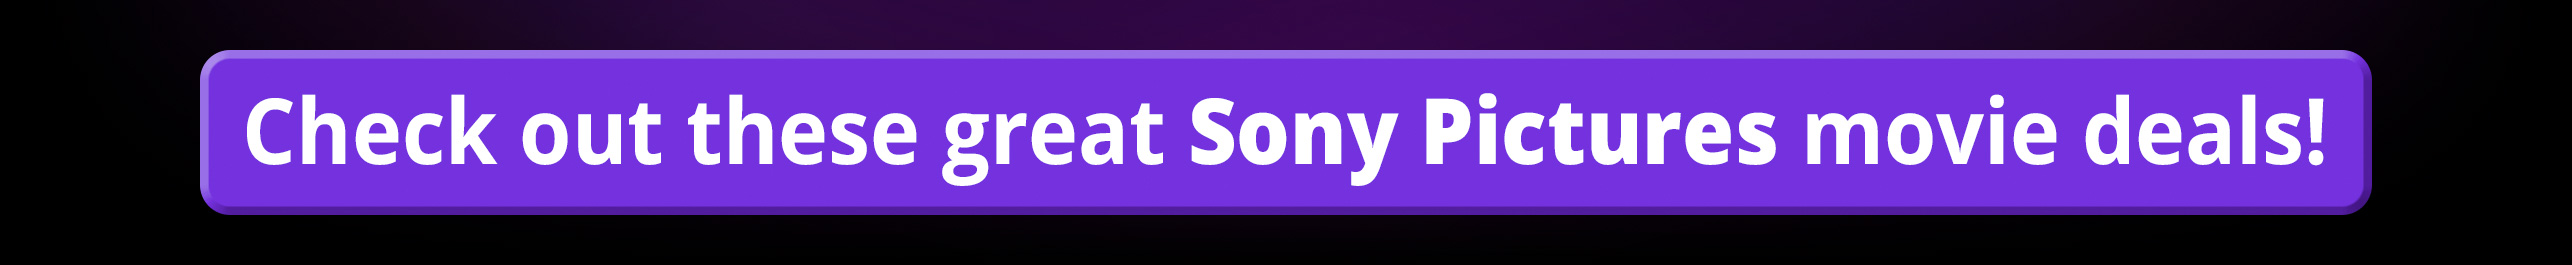 Movies Anywhere: Check out these great Sony Pictures movie deals!